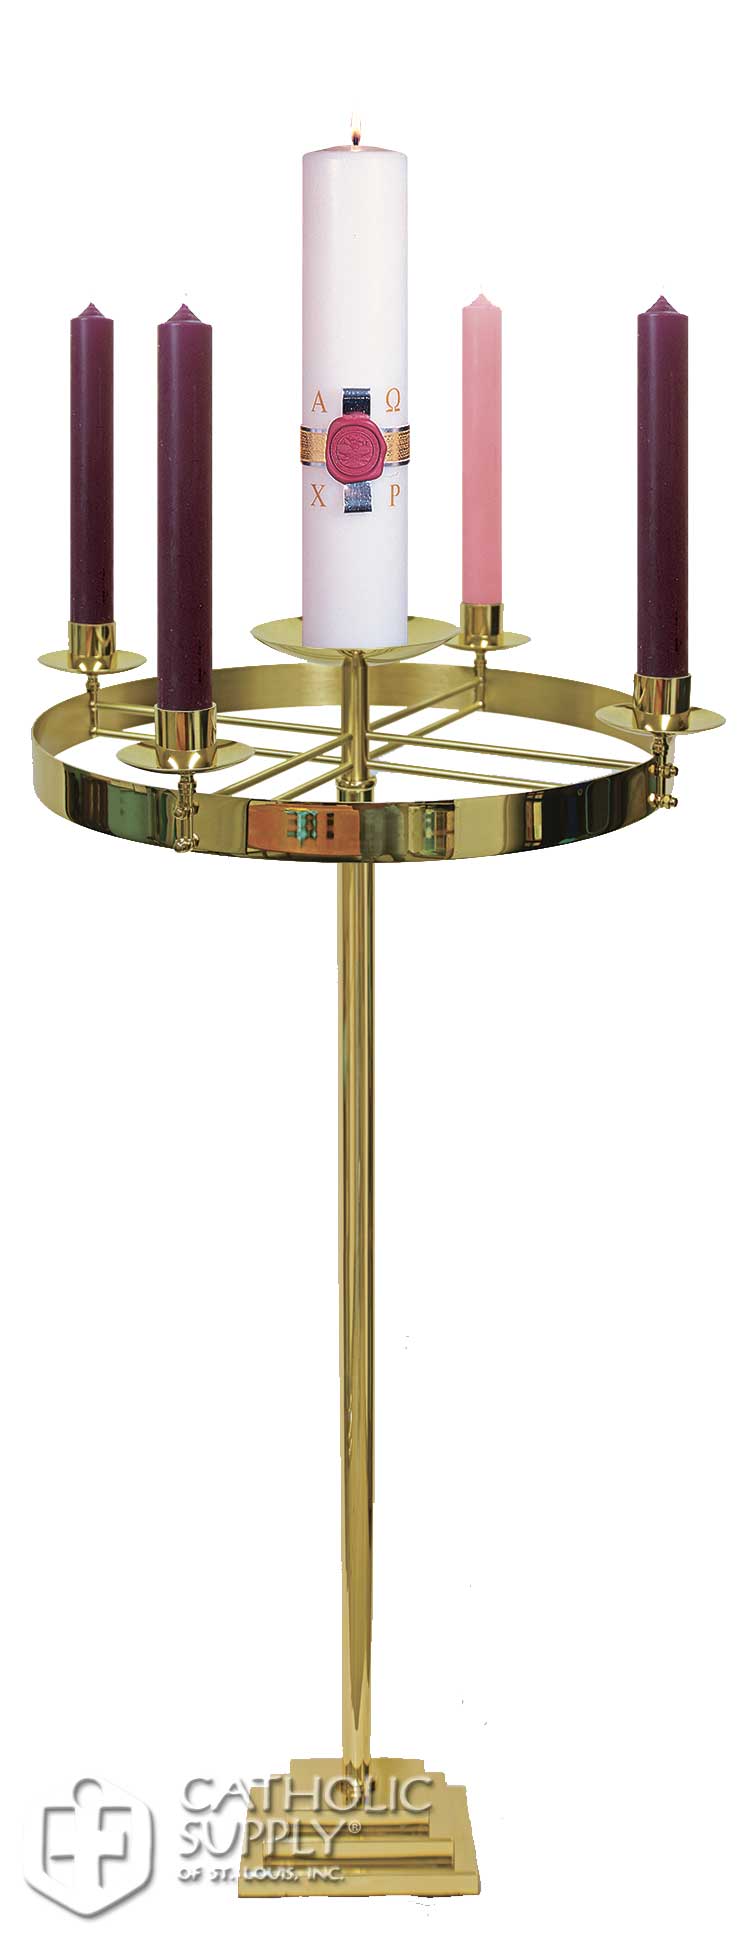 Church Advent Wreath Candleholder for 1.5 Candles - Solid Brass